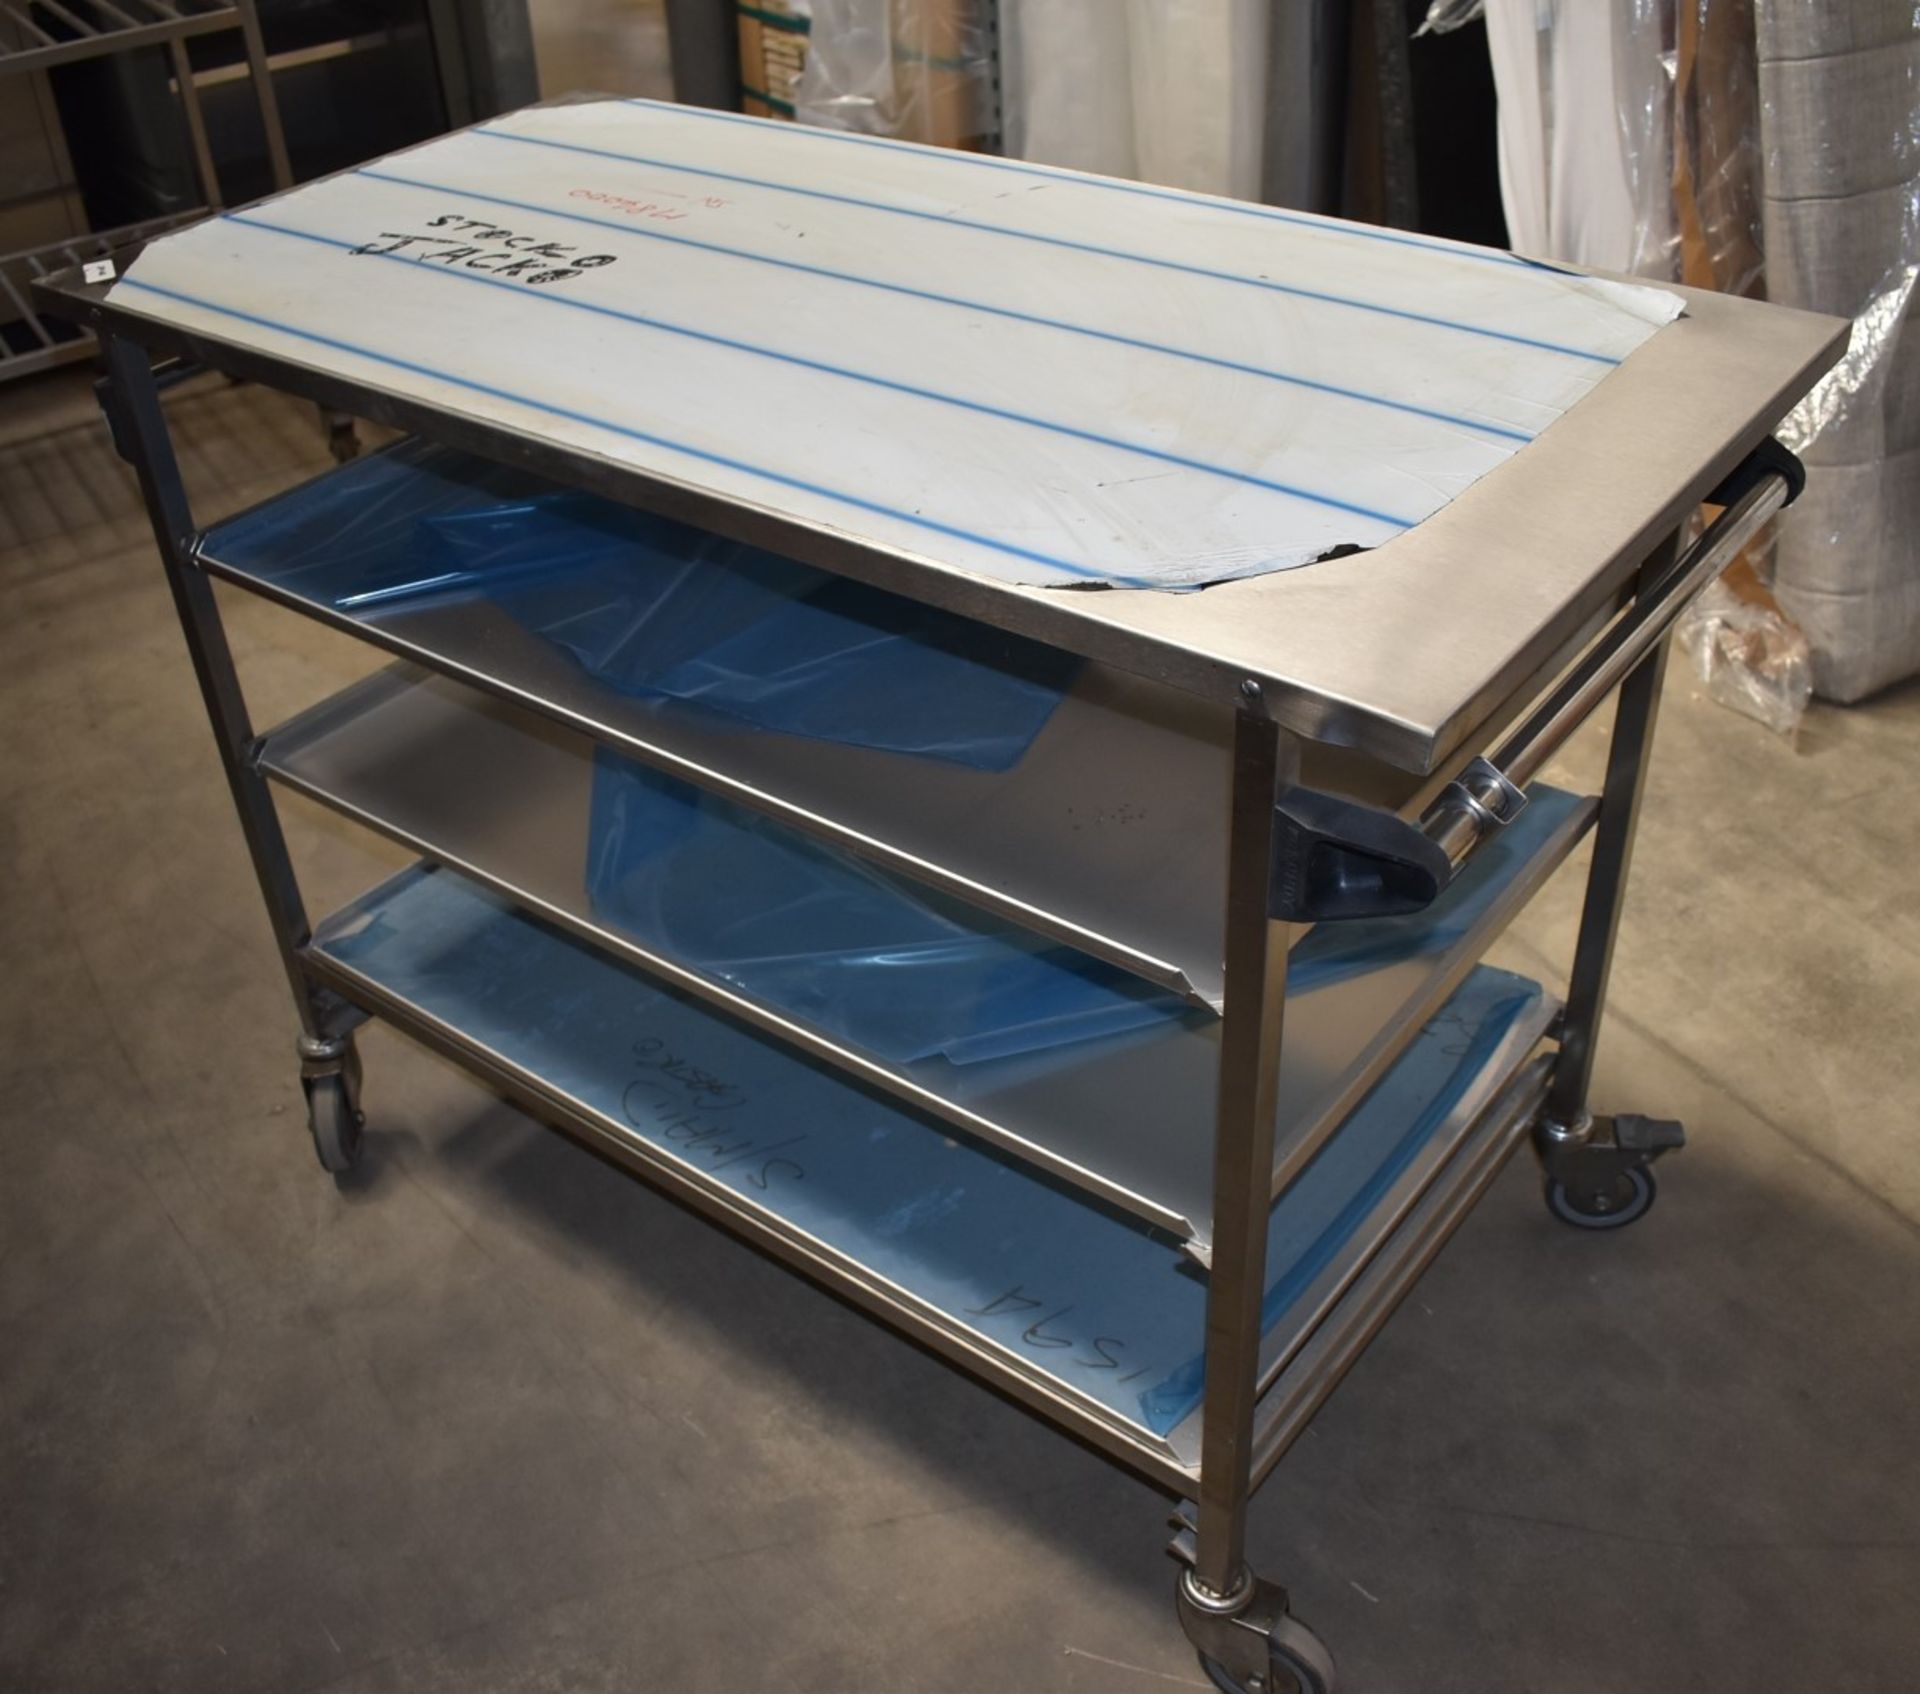 1 x Grundy Stainless Steel Prep Trolley With Pull Out Shelves, Push/Pull Handles and Castors - - Image 4 of 9